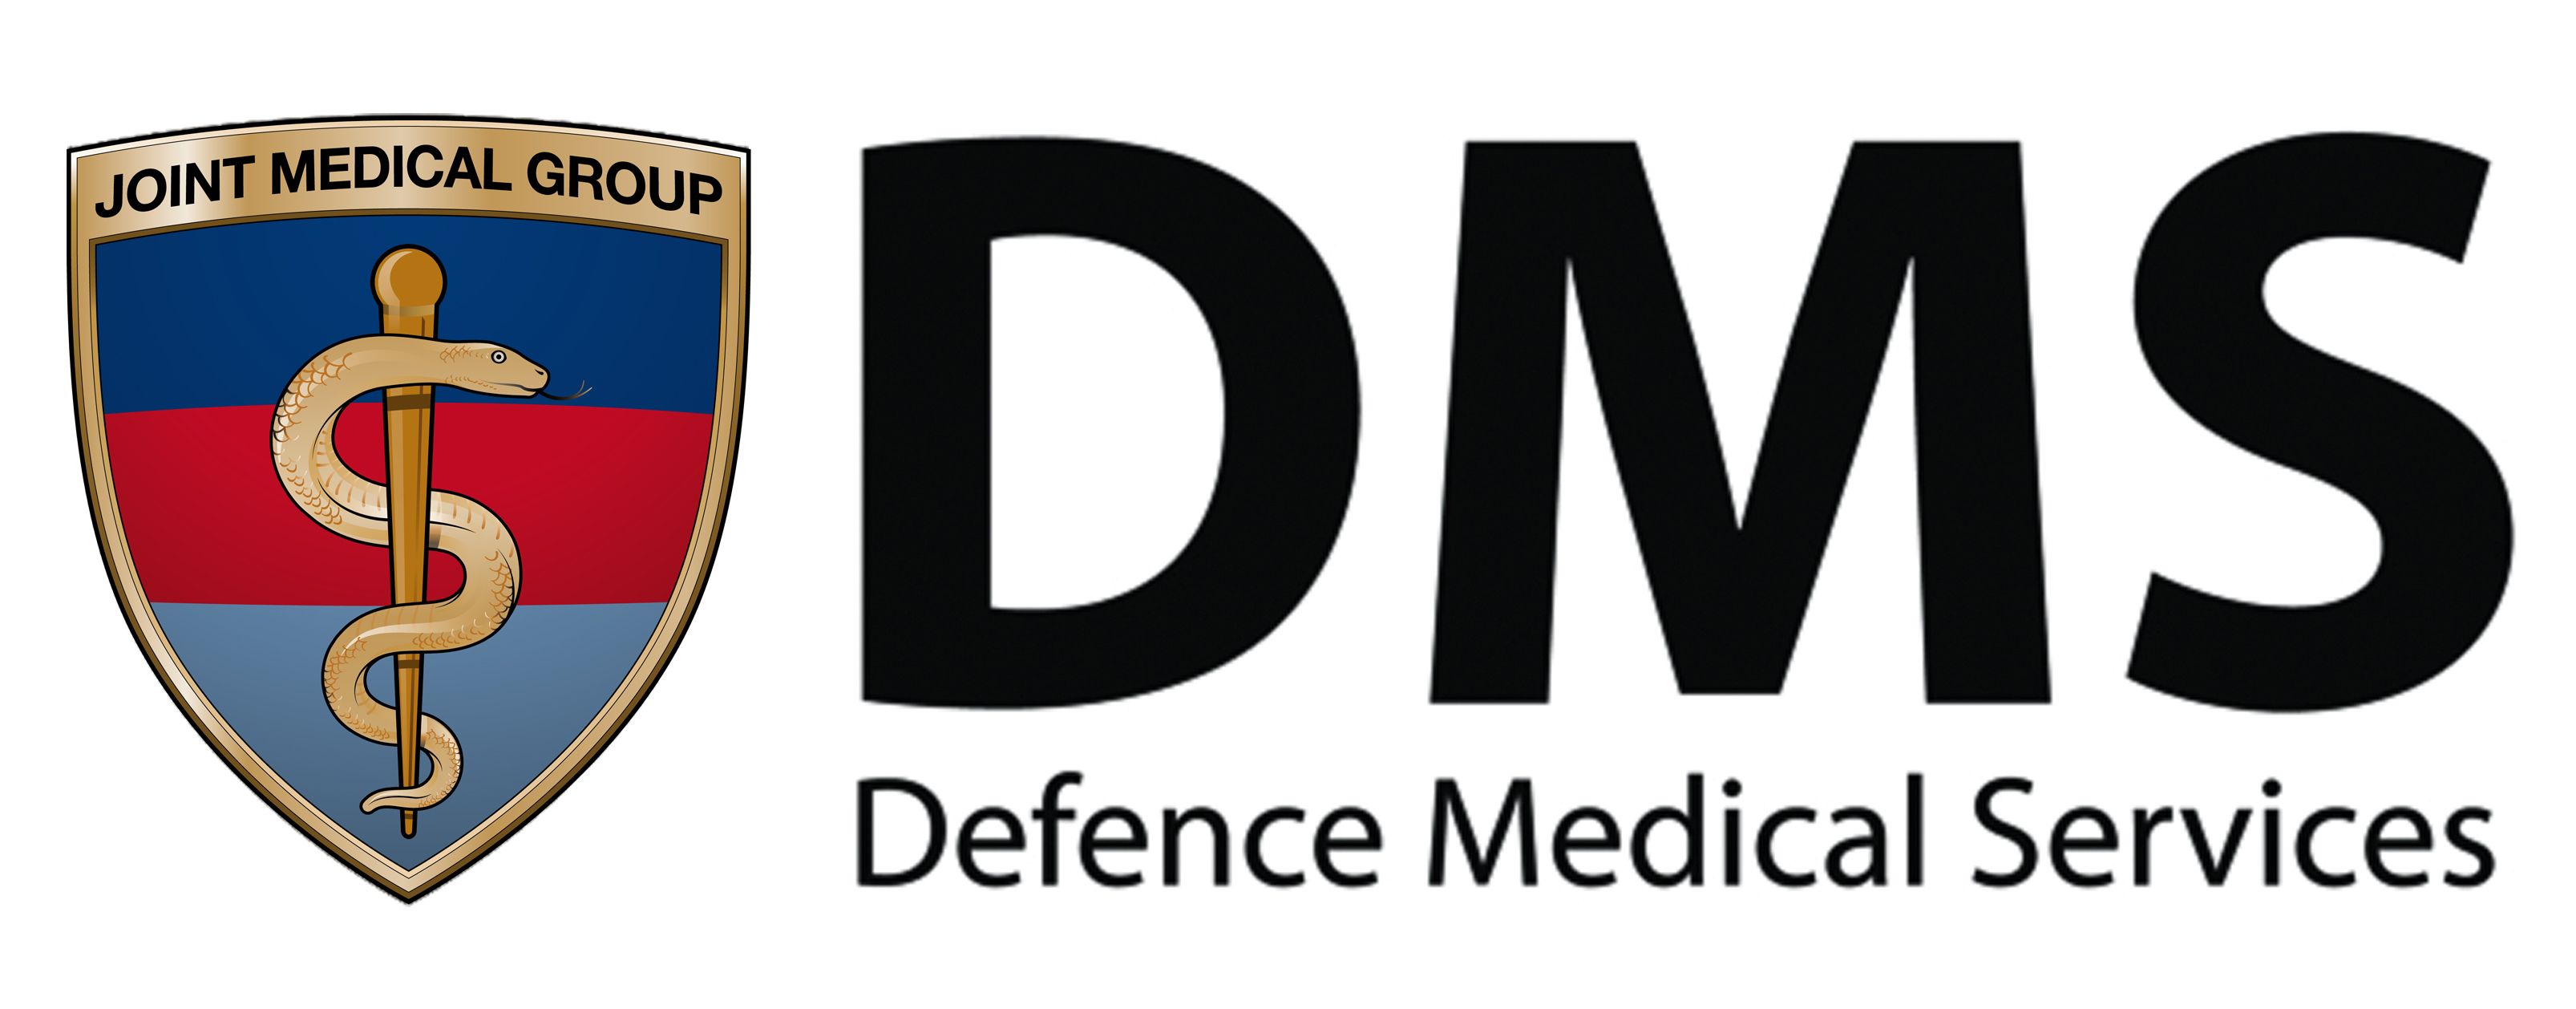 Army Medical Services - Reserves